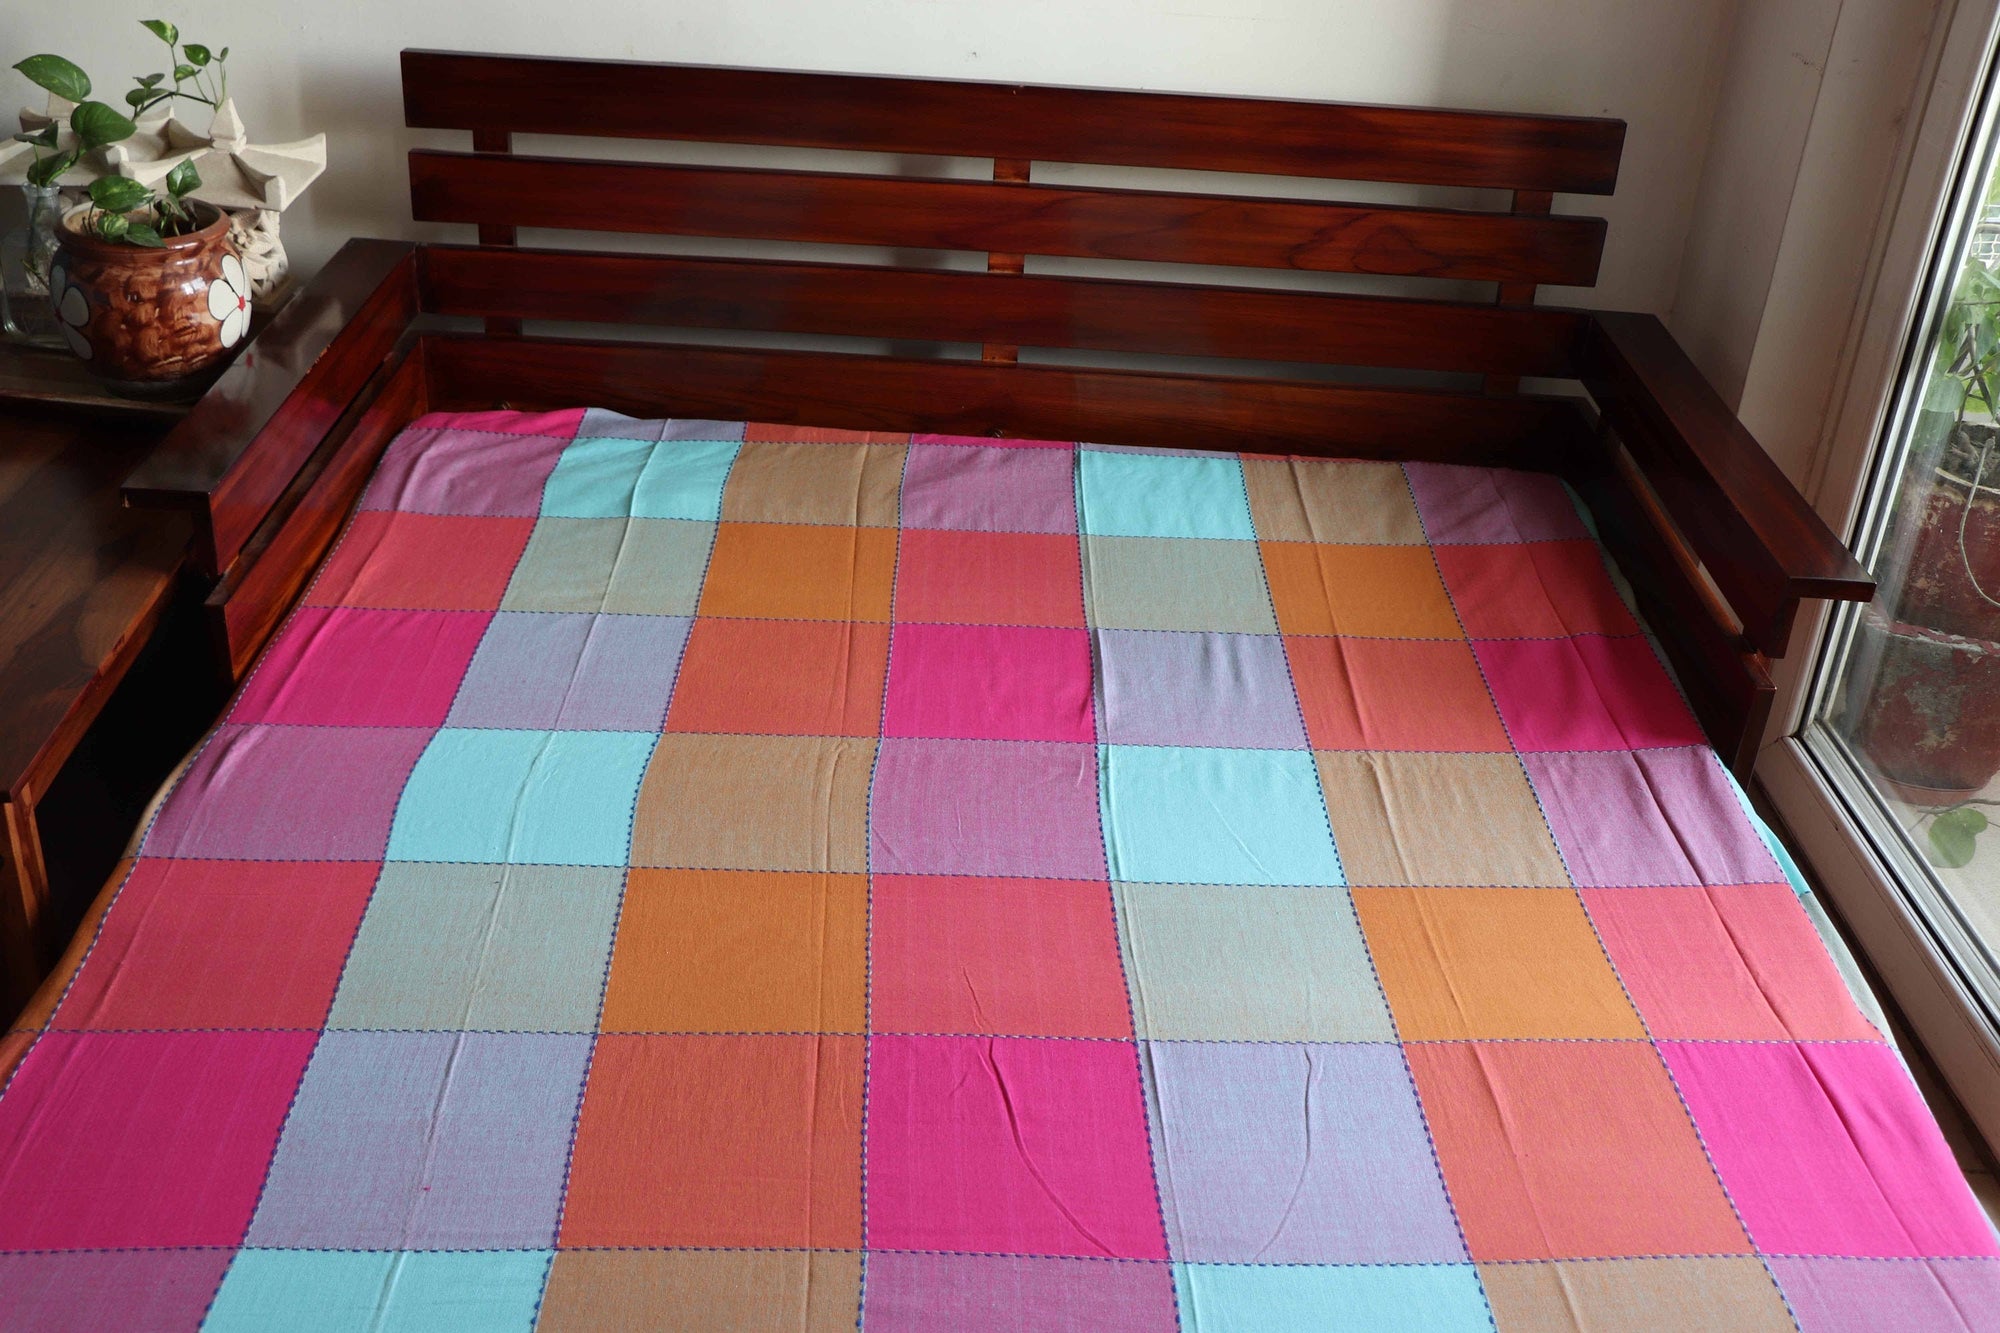 Bed-sheet/Bed-cover/Bed Linen - Handwoven bed sheet (pure cotton) - King Size - Hopscotch